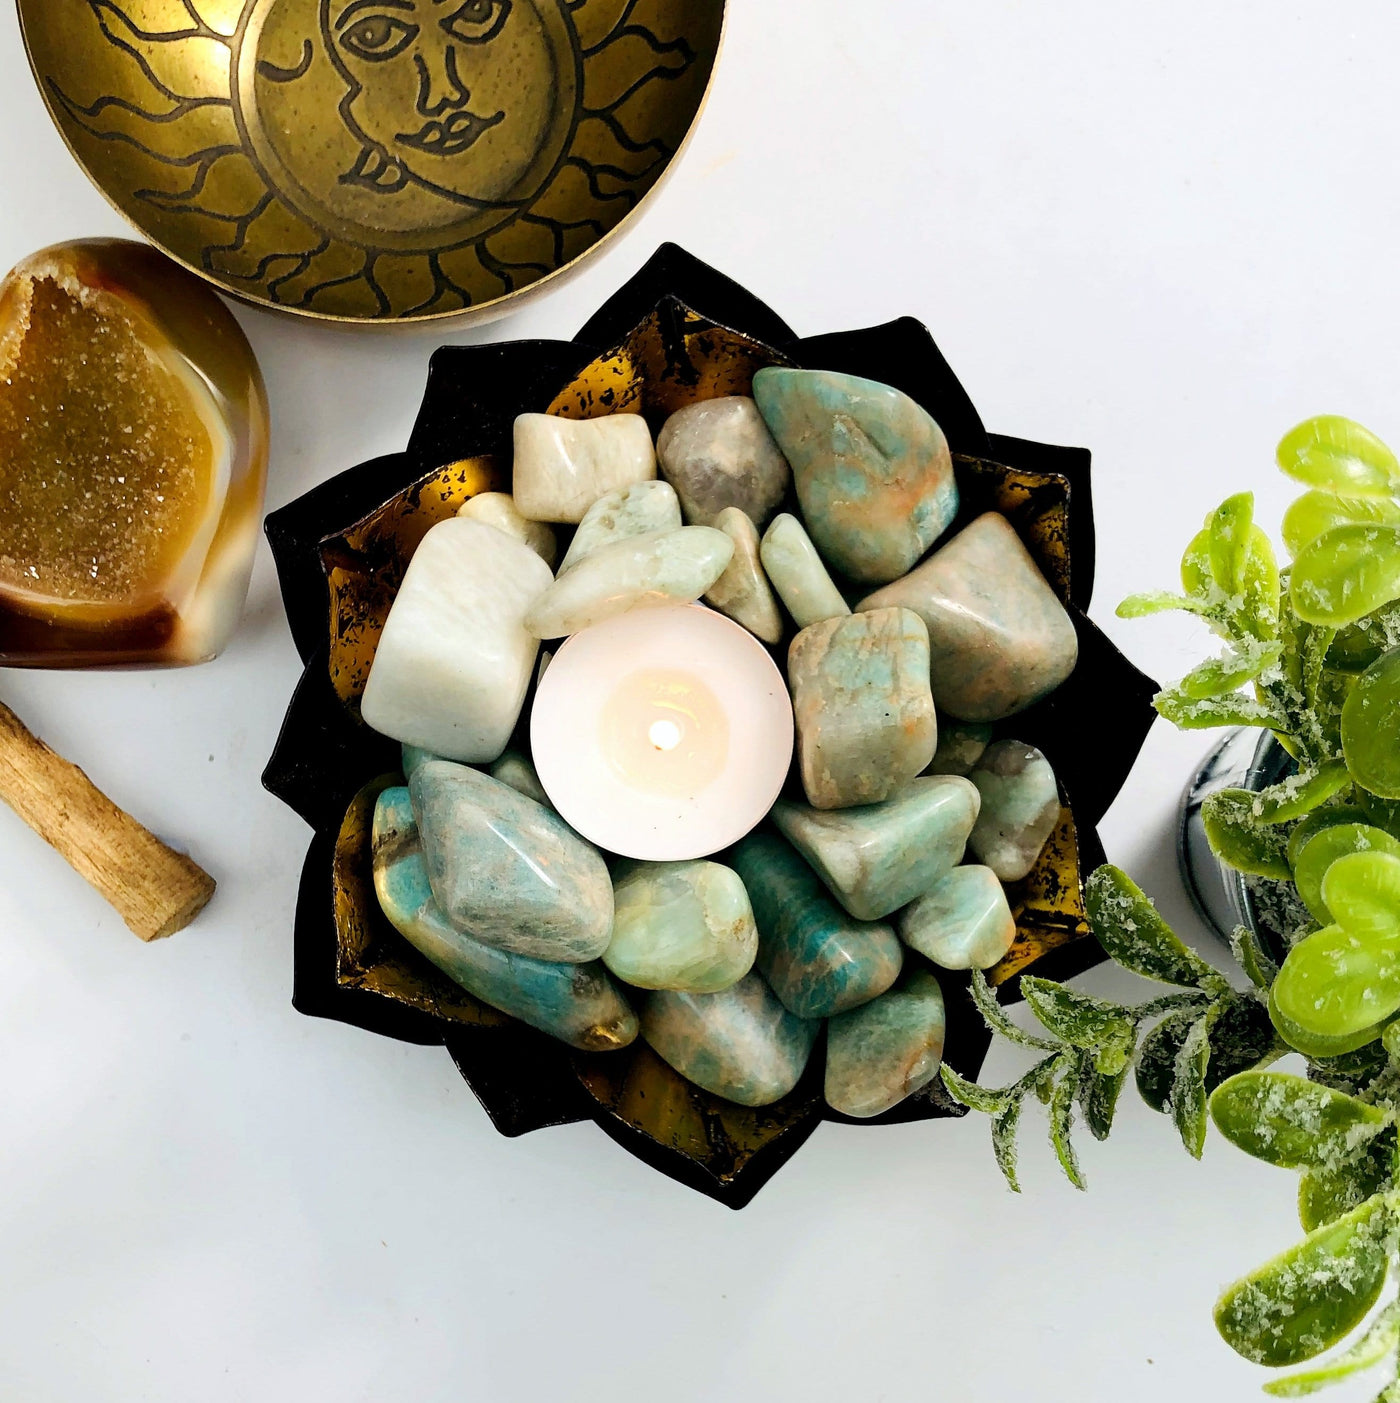 amazonite tumbled stones in a copper bowl with a candle in the middle.